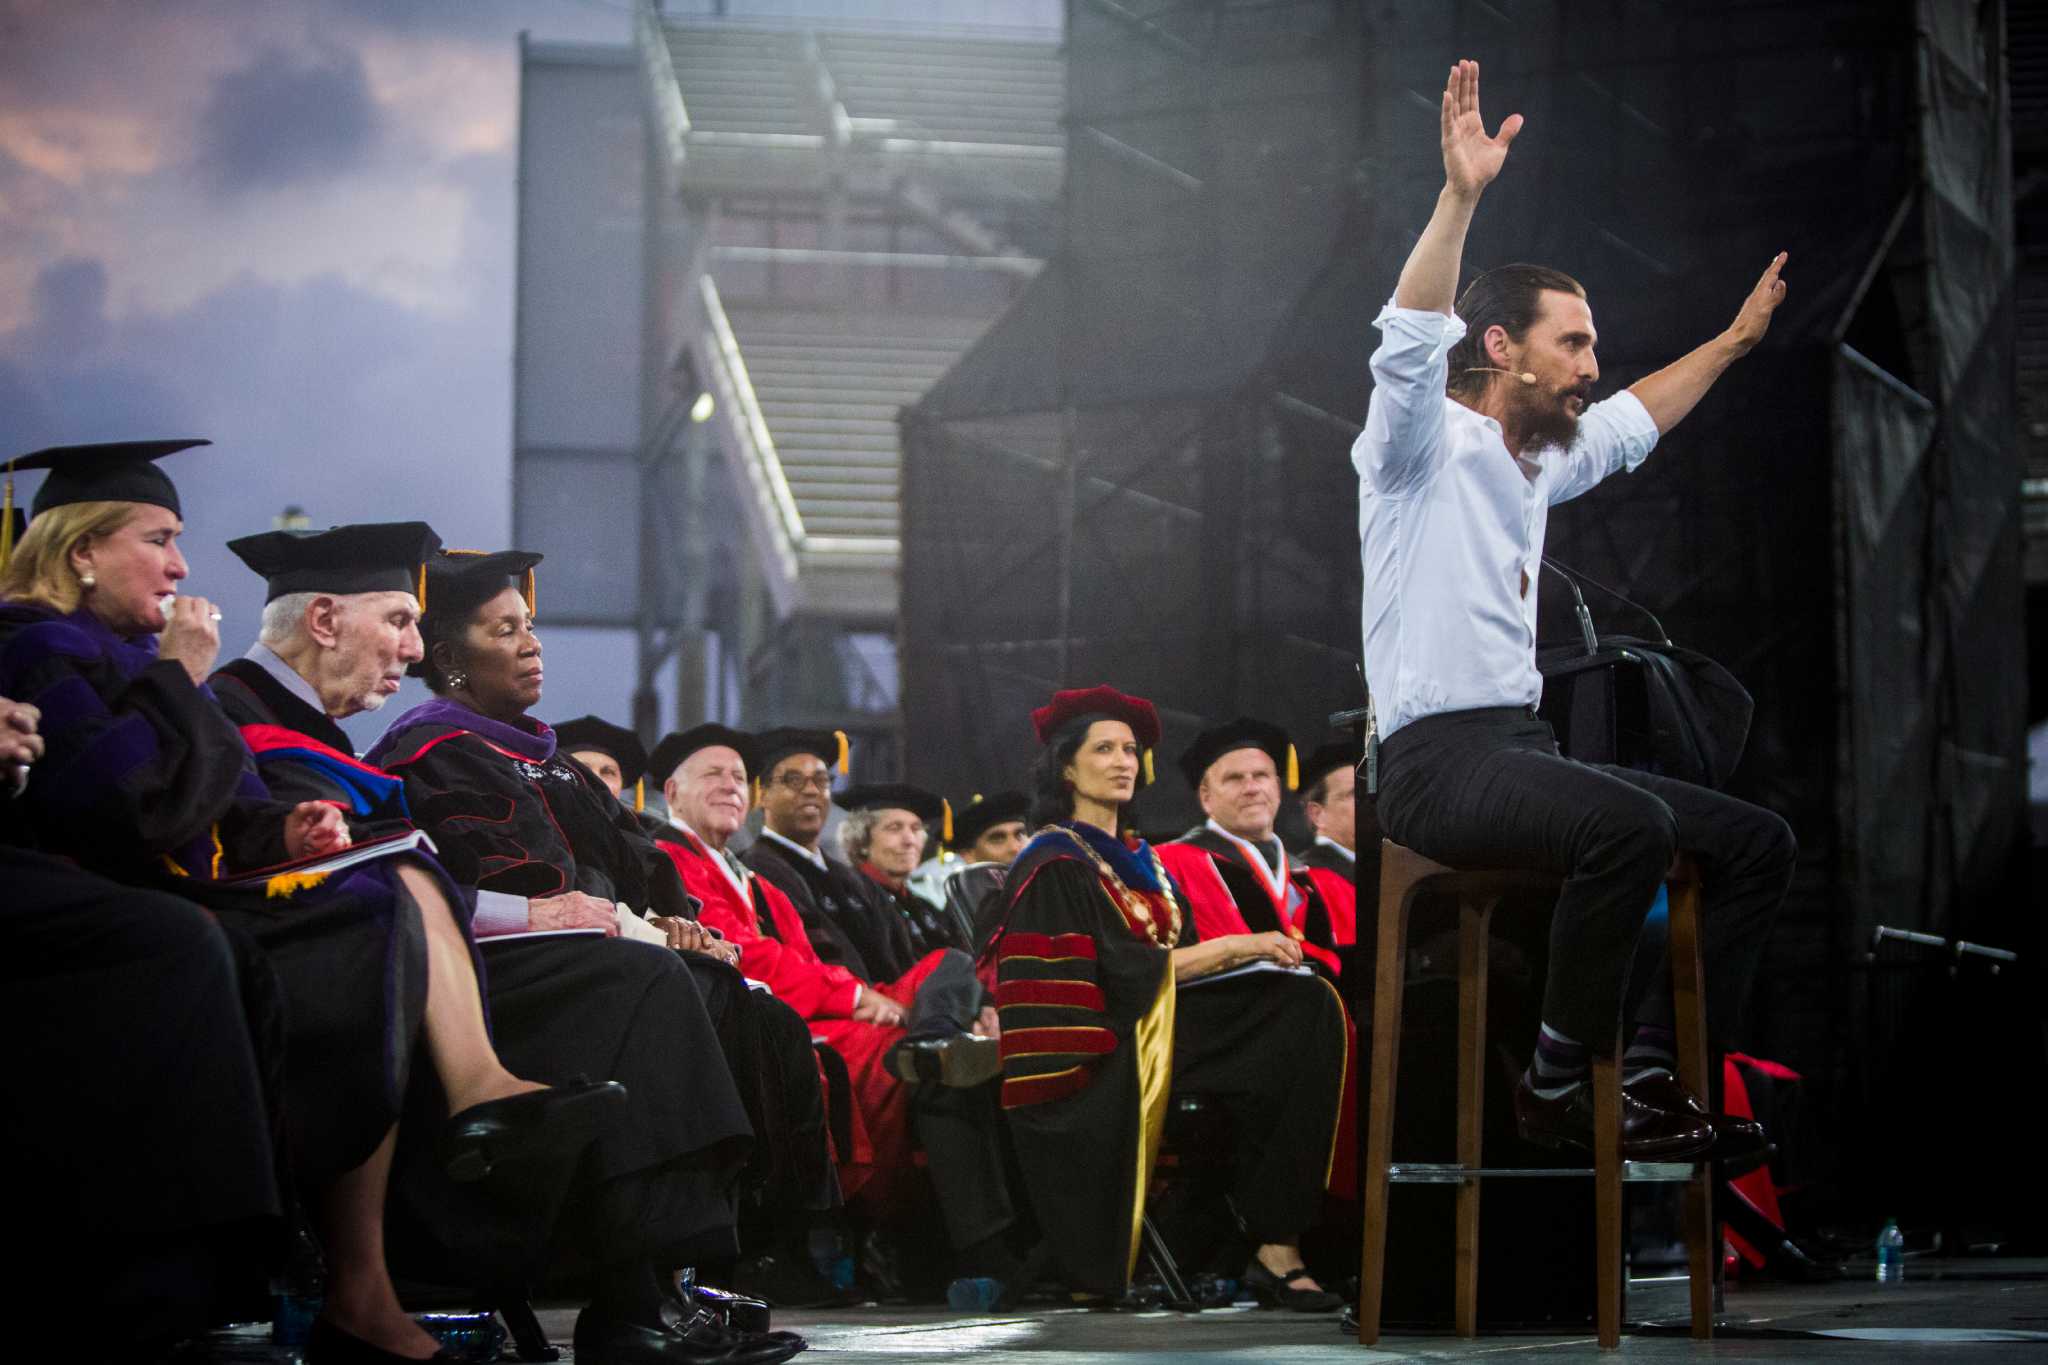 McConaughey draws in life lessons in lengthy UH commencement address - Houston Chronicle2048 x 1365